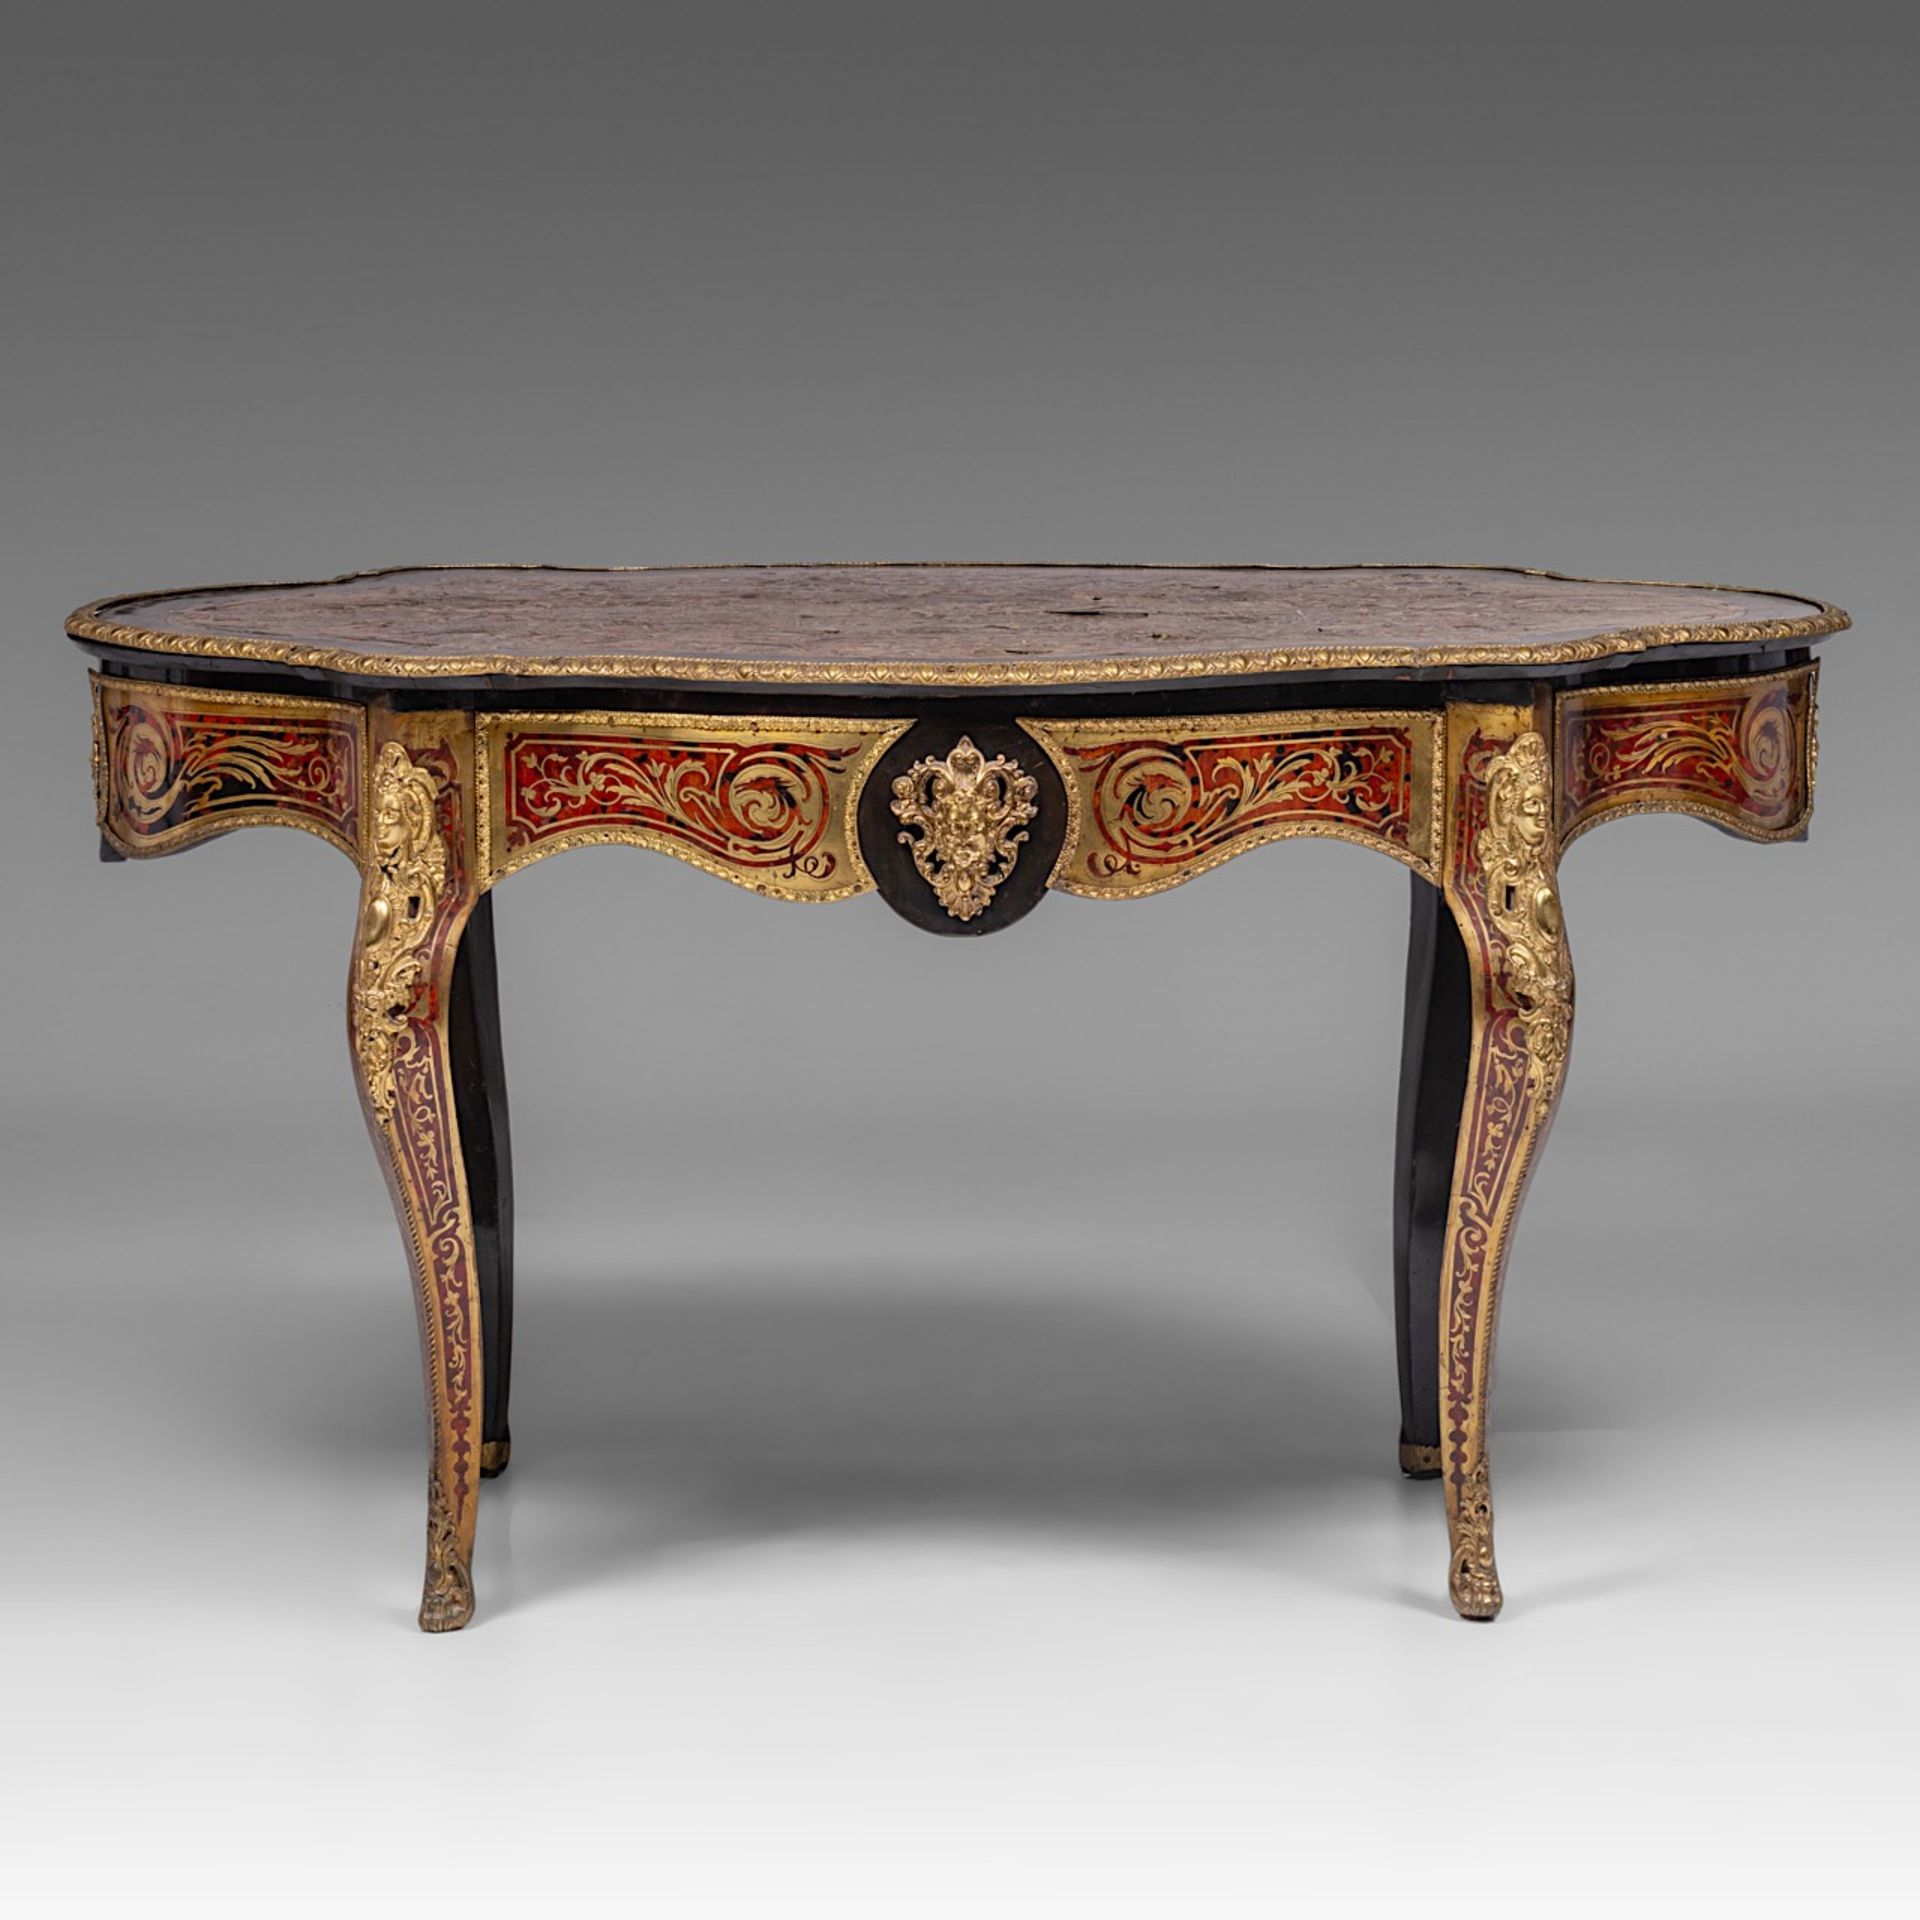 A Napoleon III Boulle work centre table with gilt bronze mounts, late 19thC, H 79 - W 146 - D 90 cm - Image 4 of 12